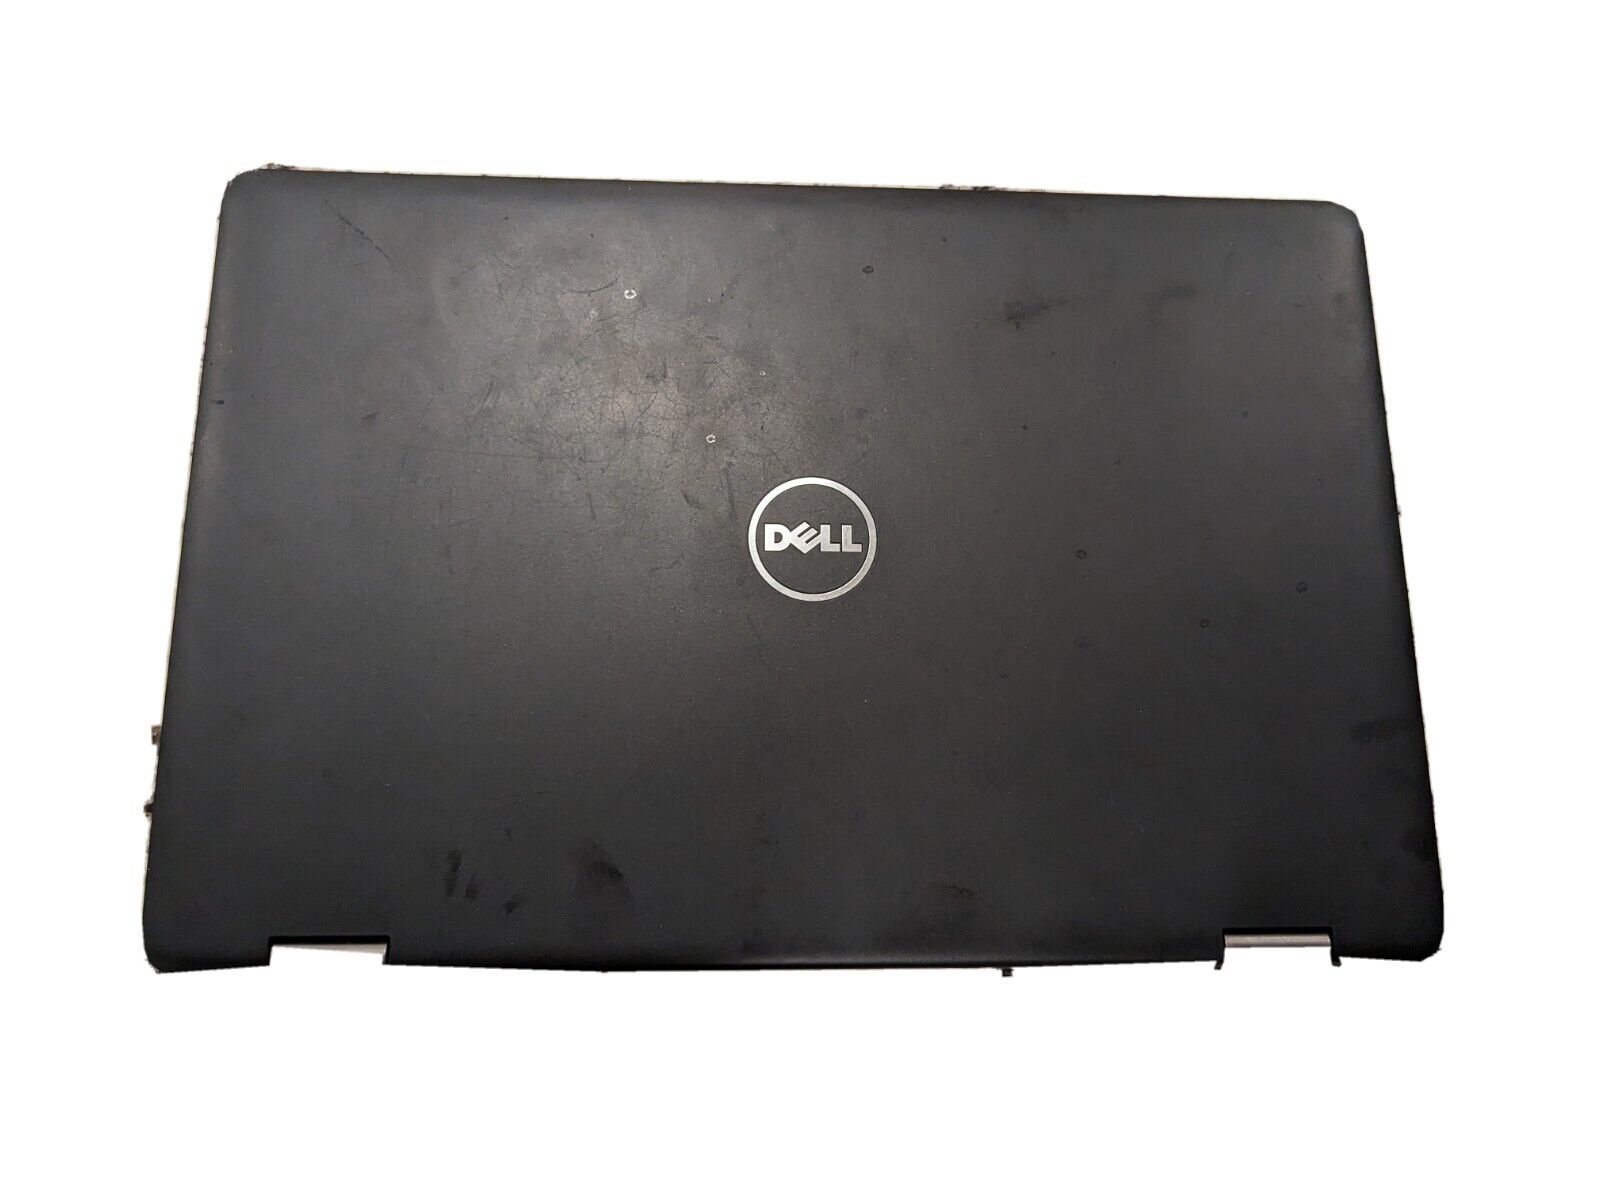 Dell Inspiron  7568 Laptop P55F / 2-in-1